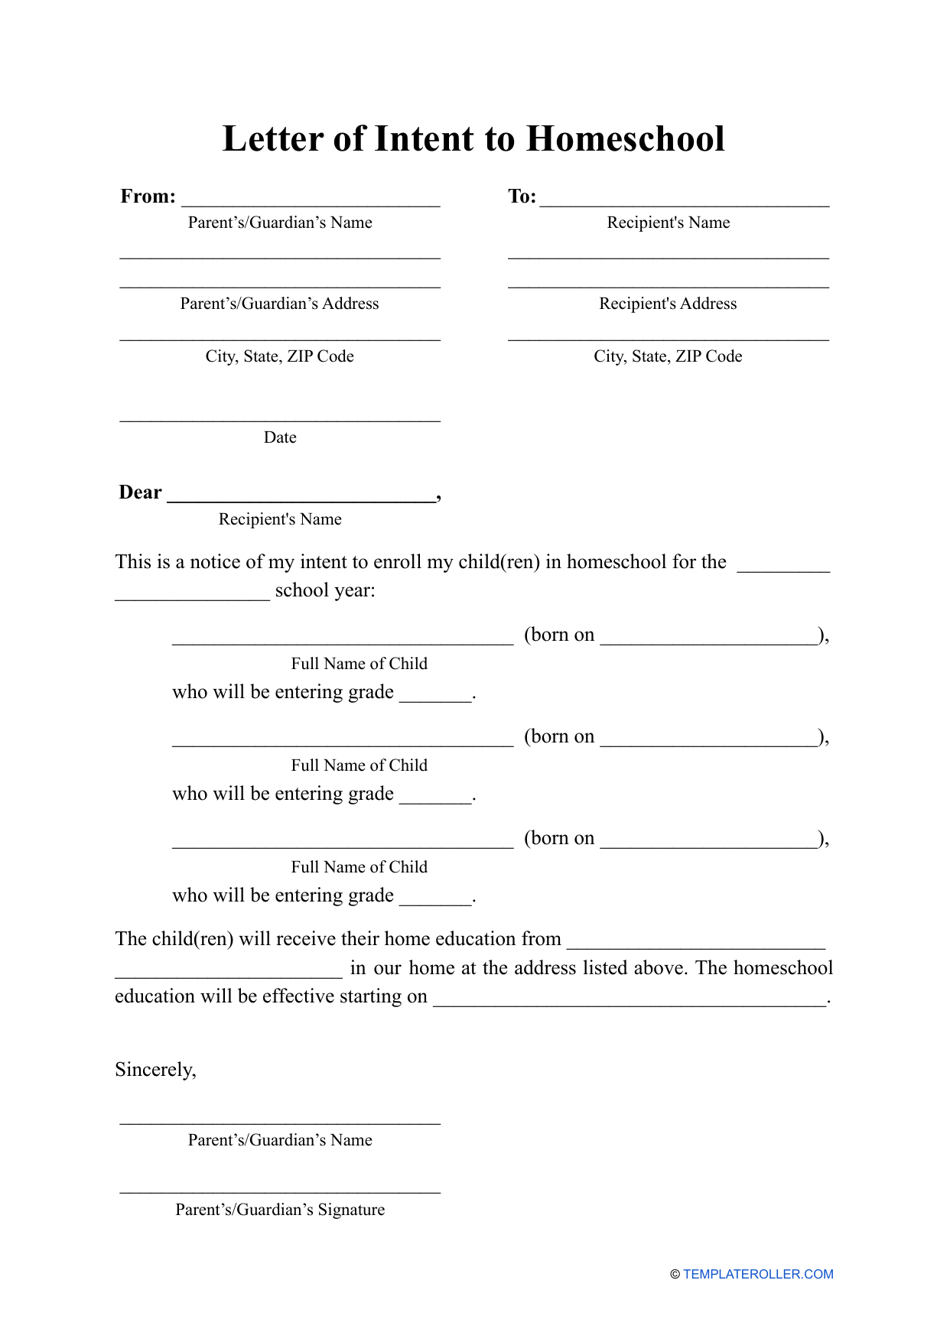 Letter of Intent to Homeschool Template Download Printable PDF